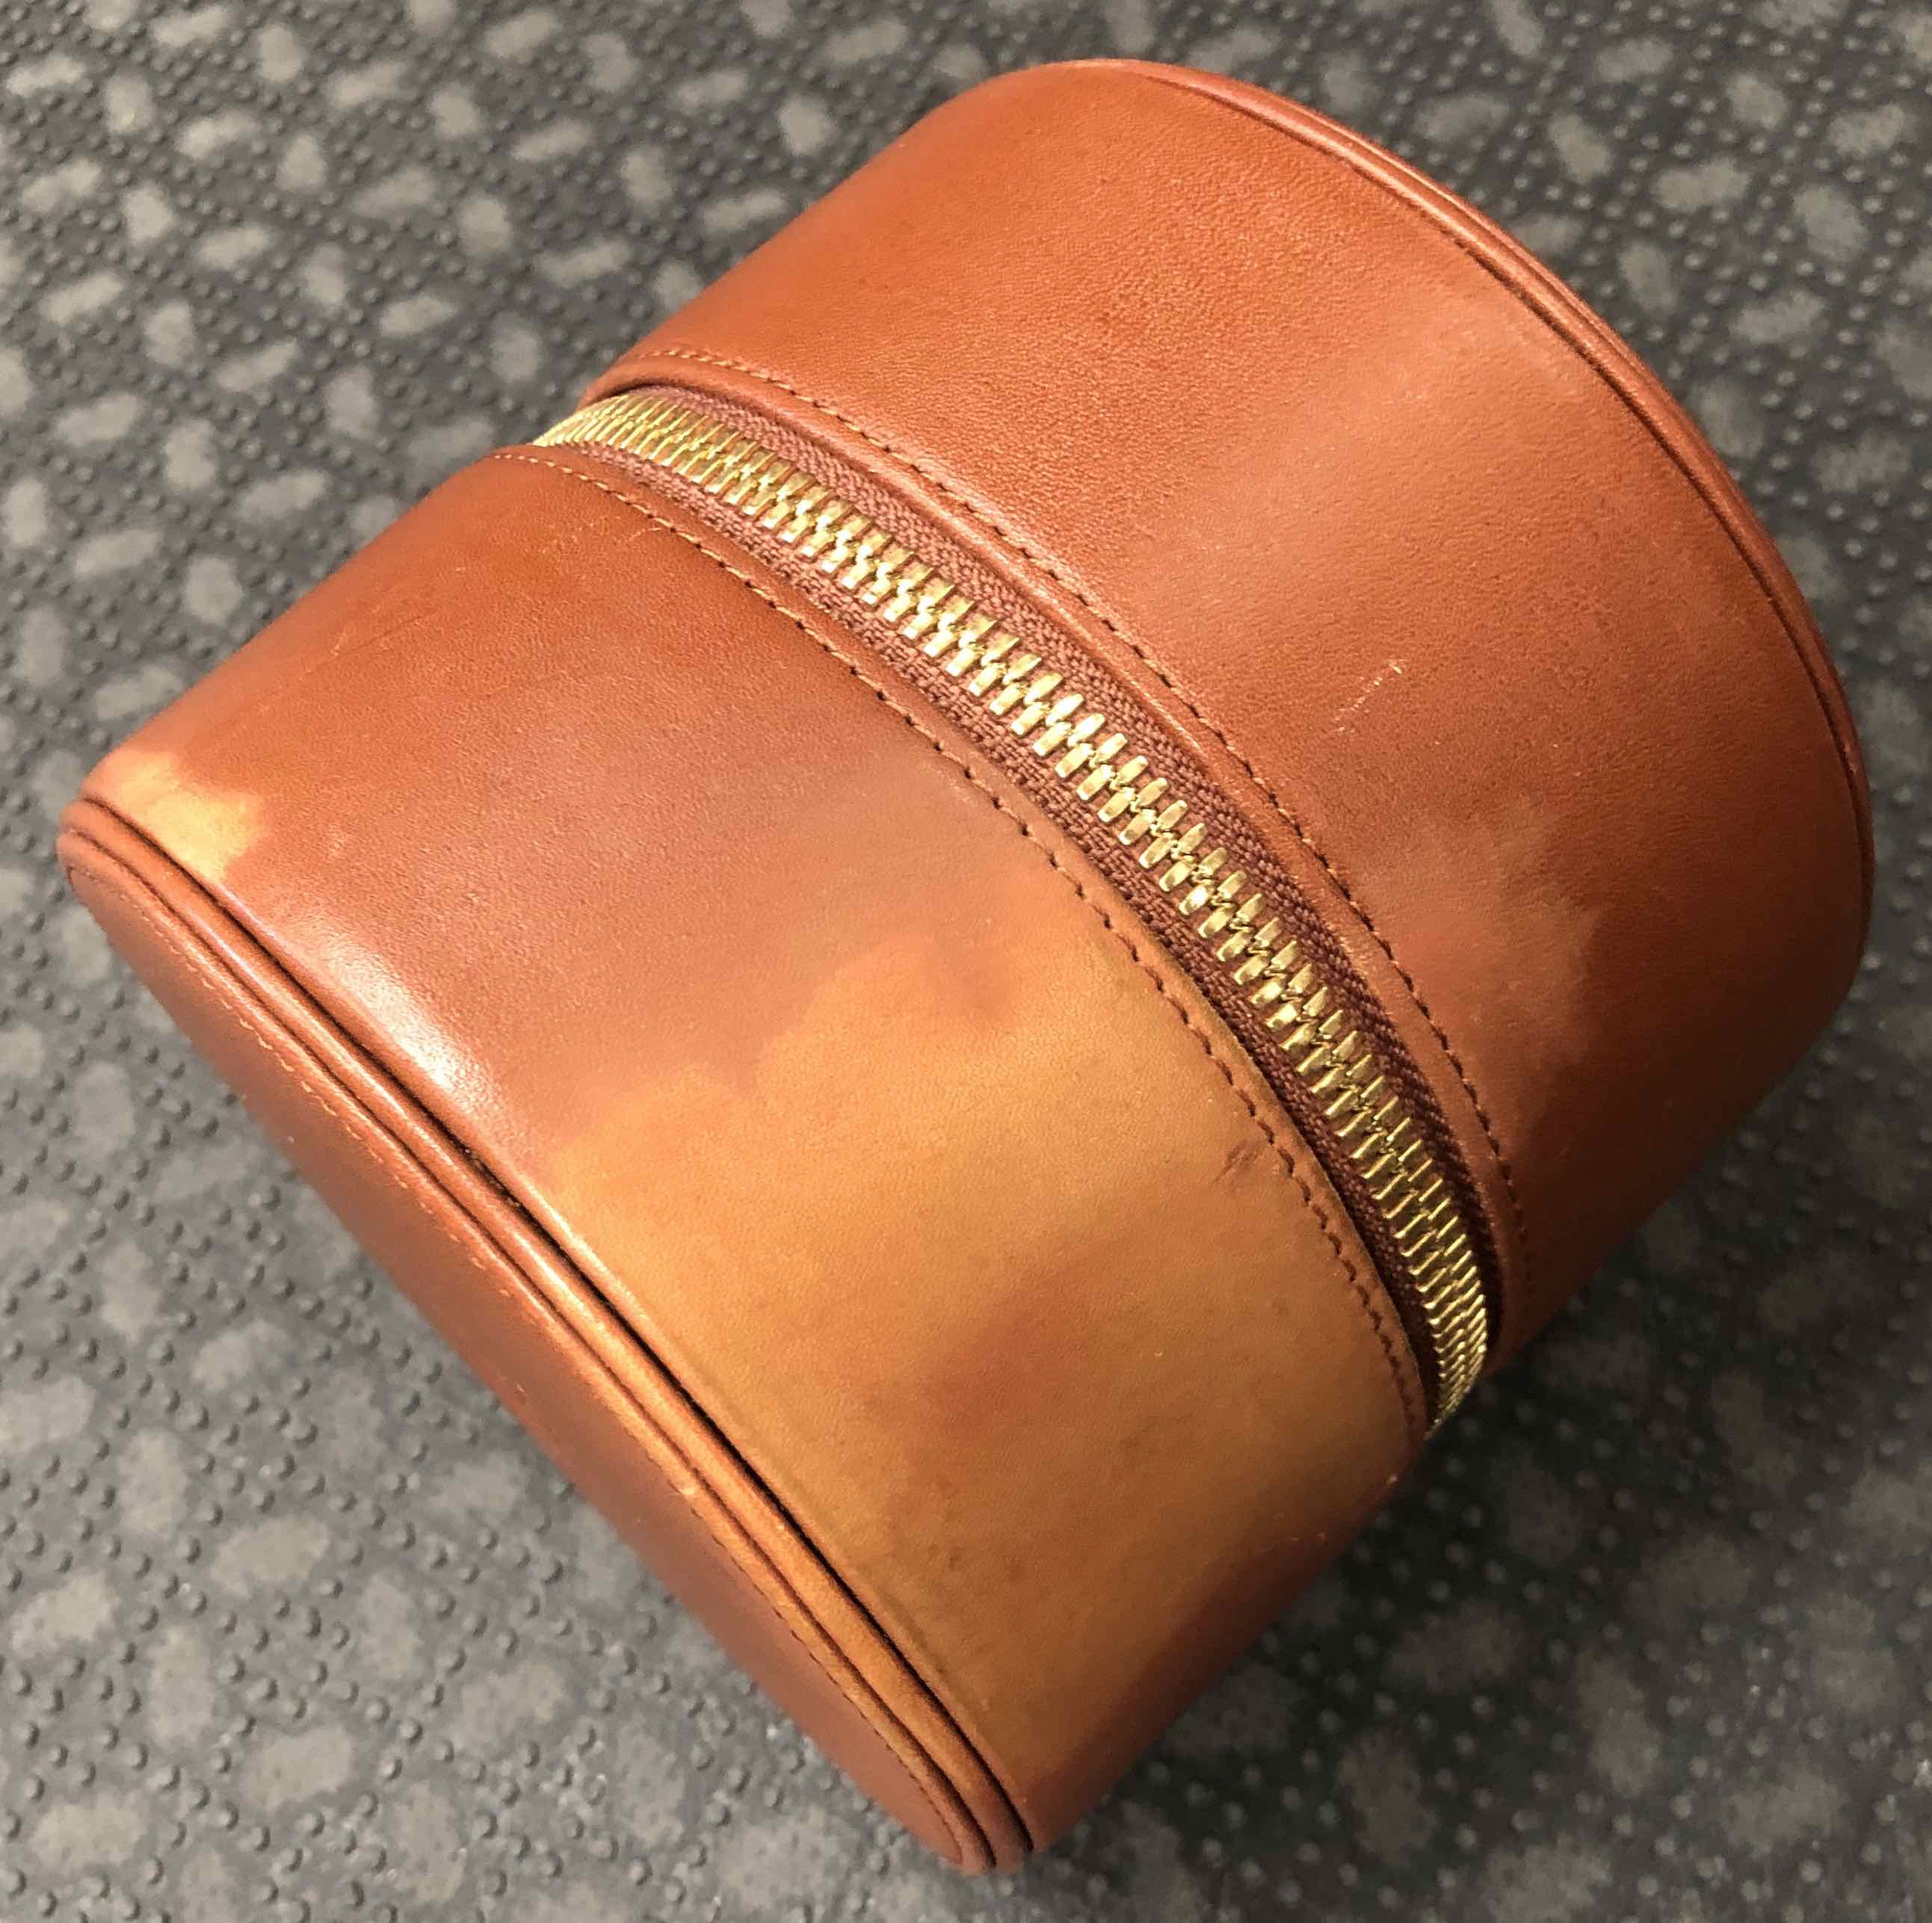 Hardy Leather Reel Case Lardy Lambs Wool Interior CC – The First